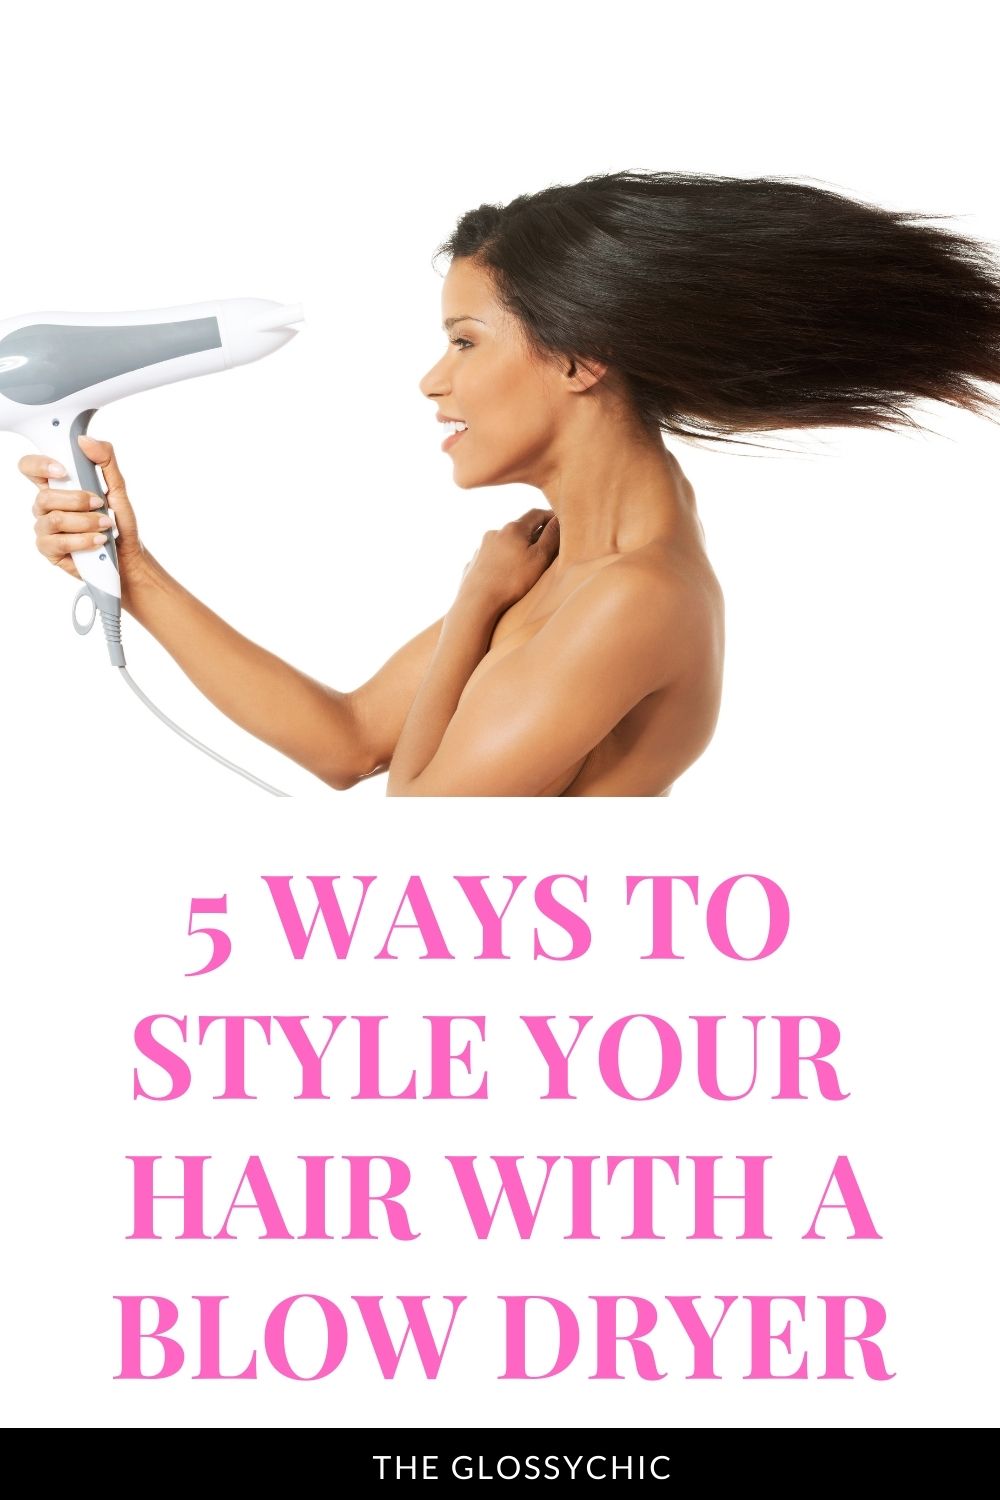 5 ways to style your hair with a blow dryer